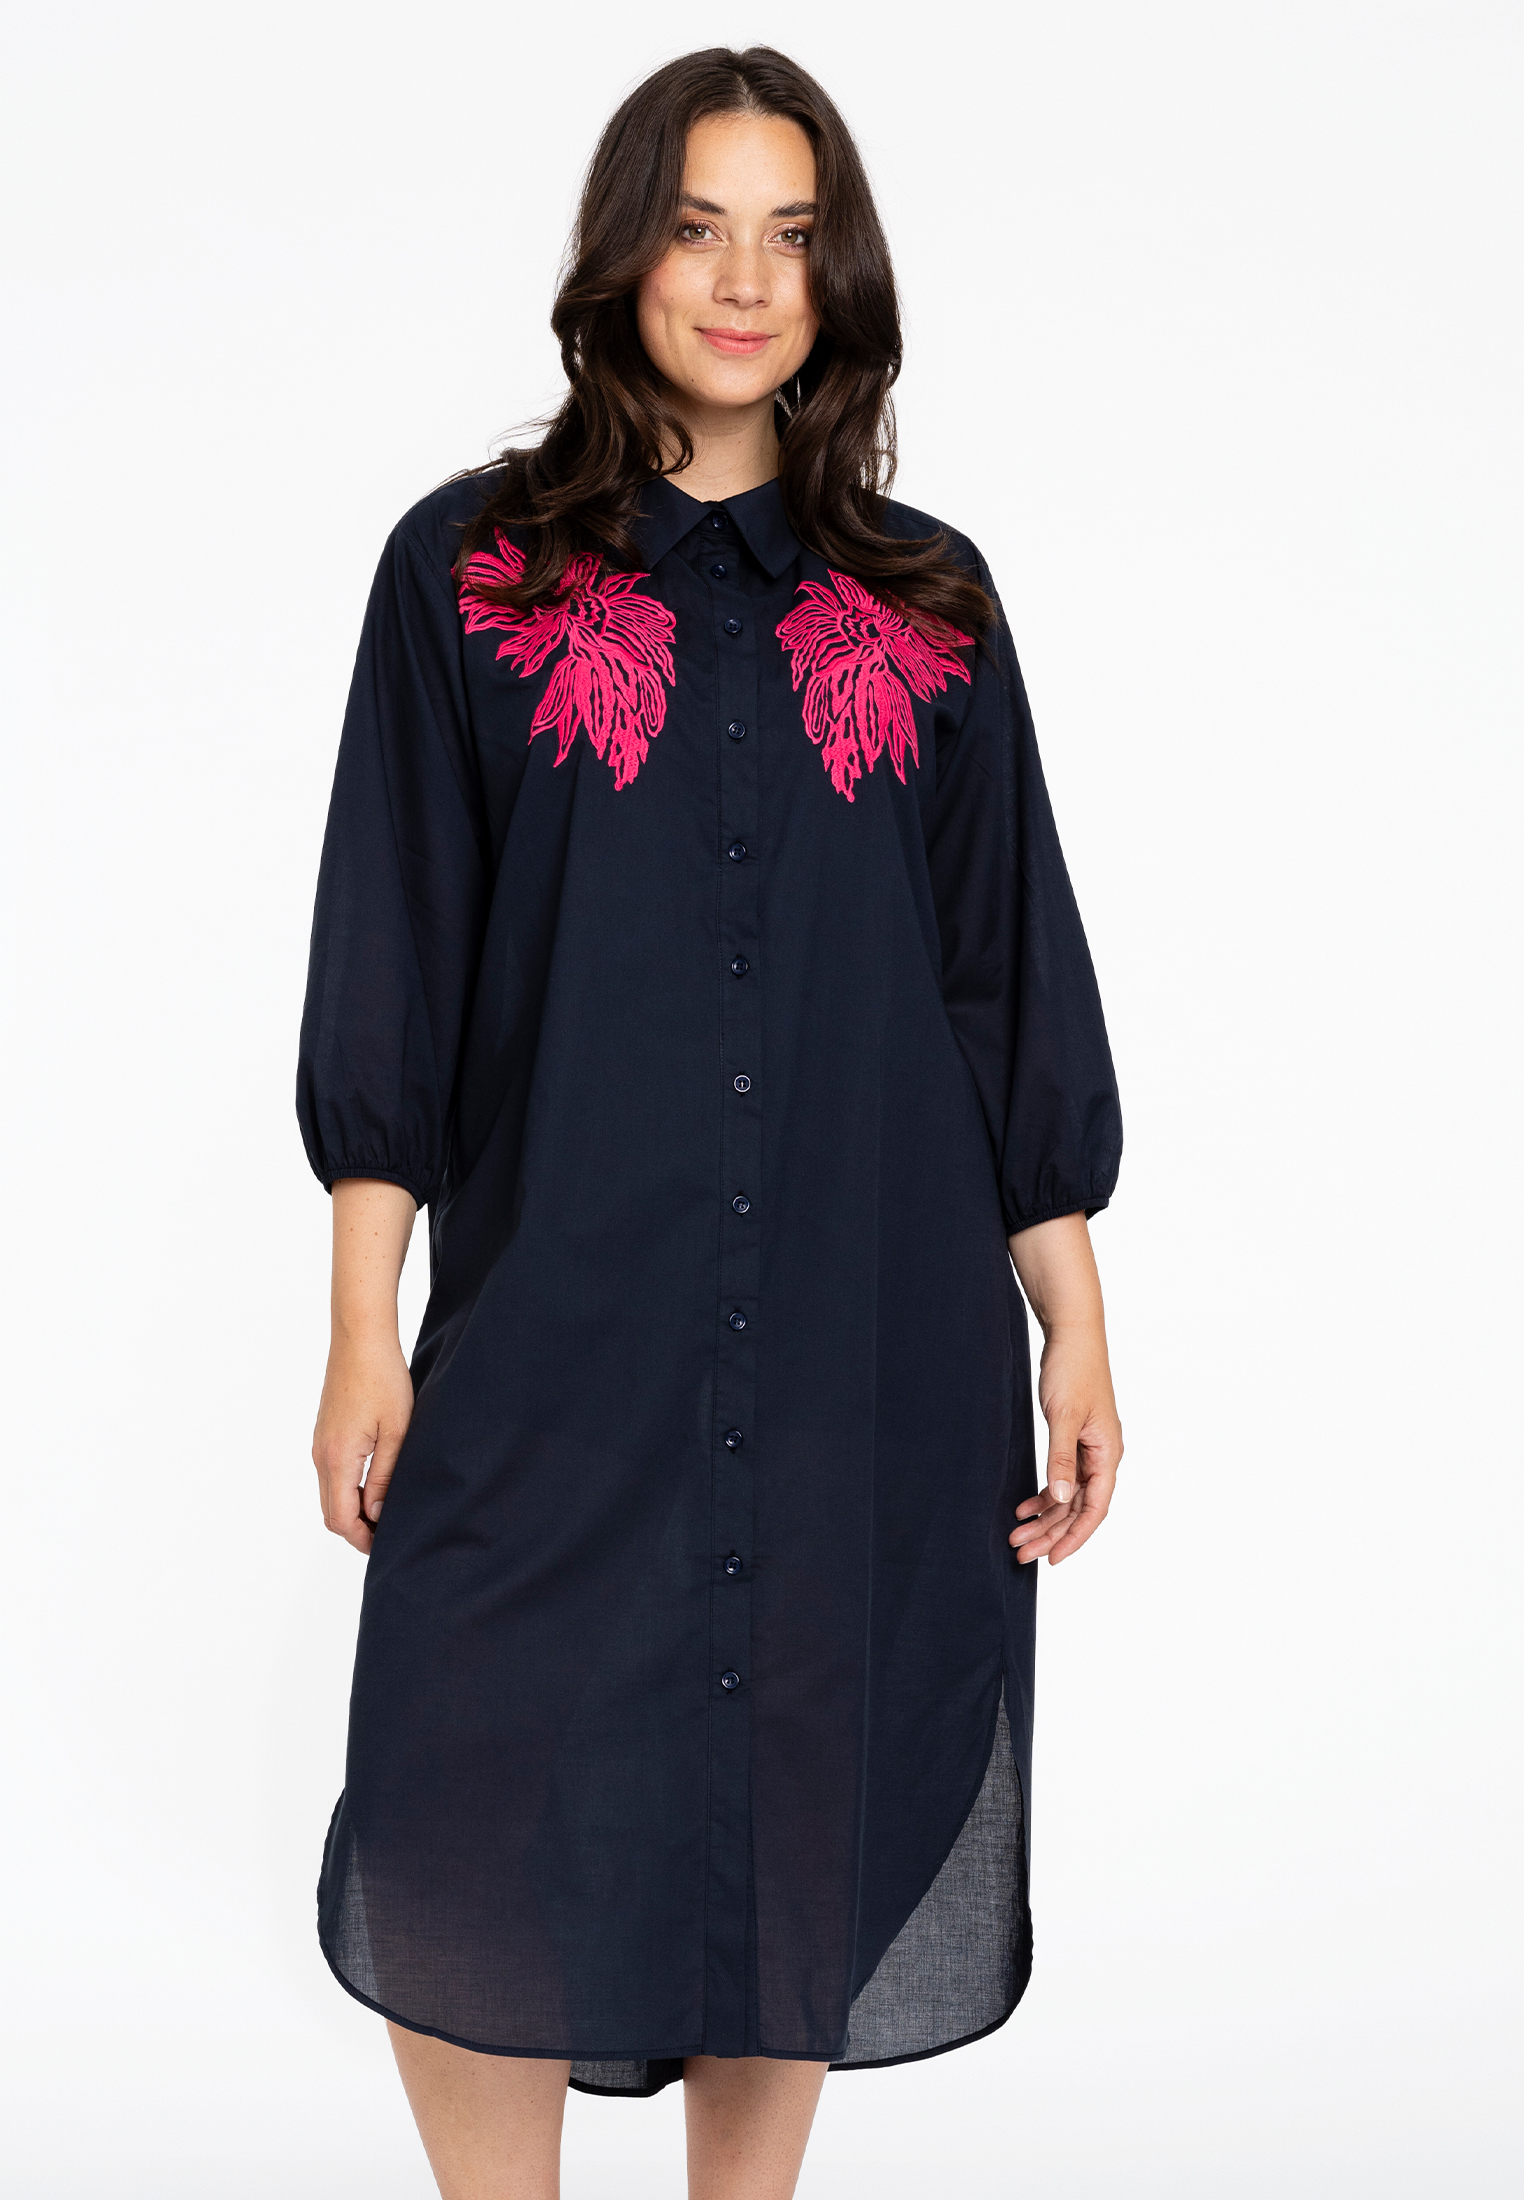 Dress embroided SOFT COTTON